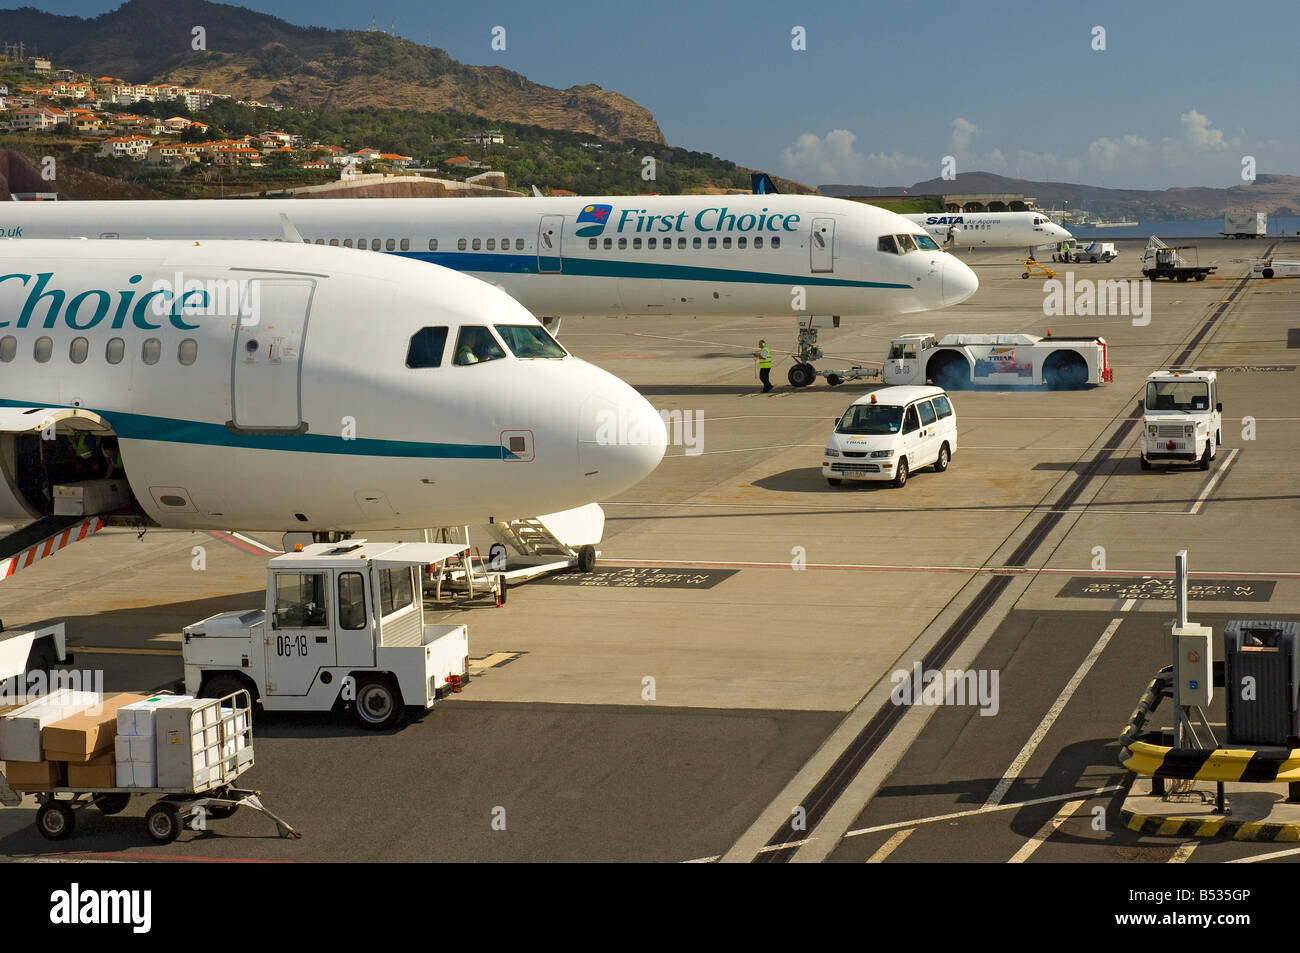 First Choice planes aircraft at Funchal airport Madeira Portugal EU Europe Stock Photo